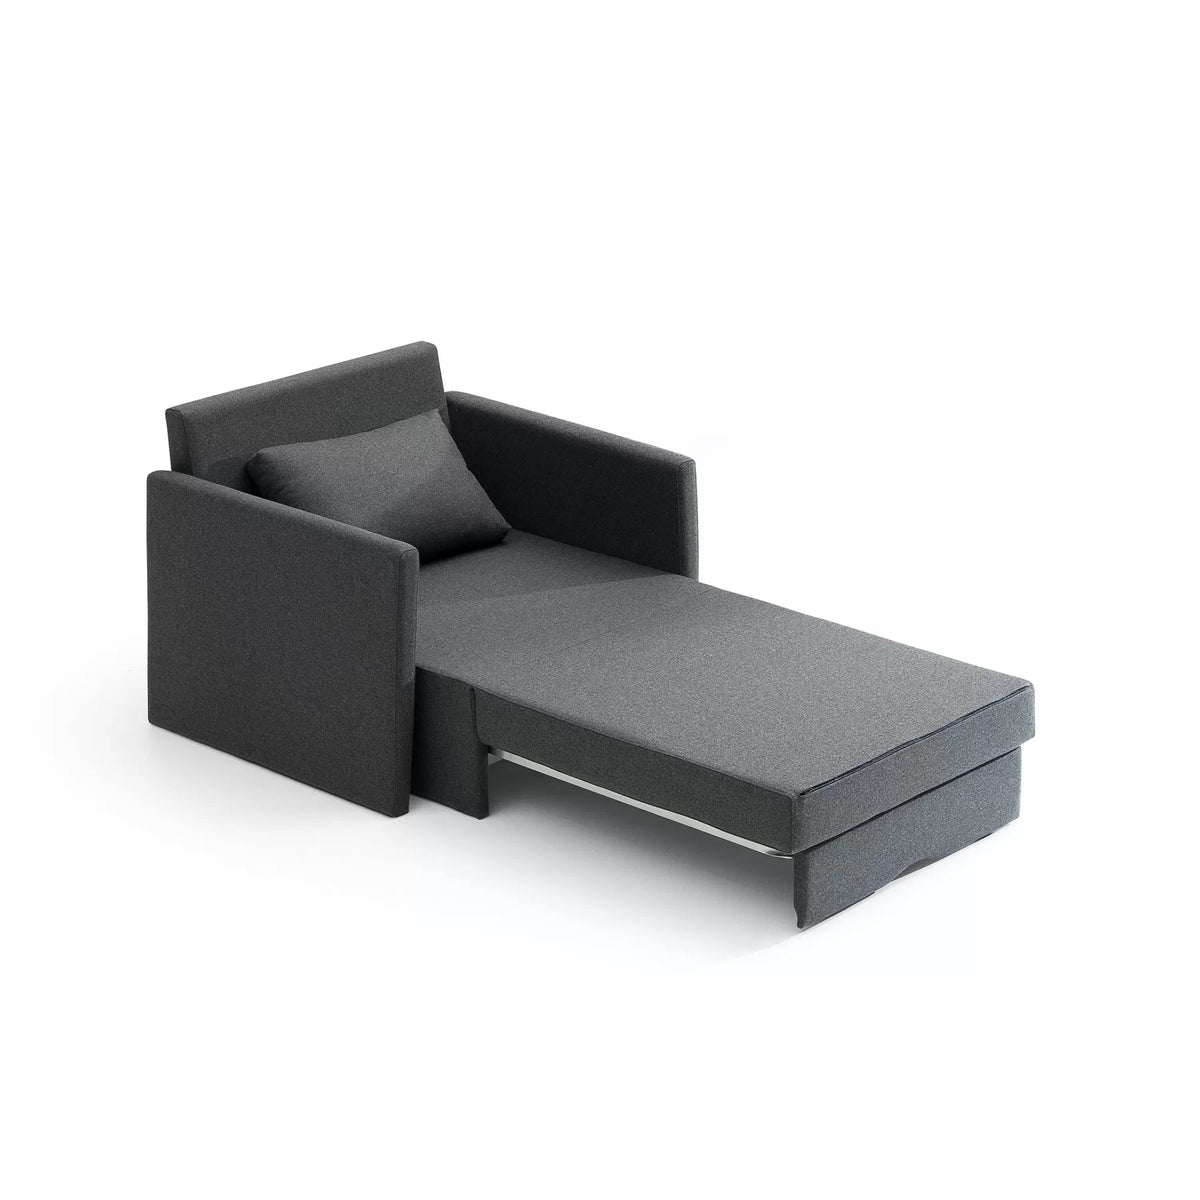 Meno 933 Lounge Sofa Bed-TM Leader-Contract Furniture Store